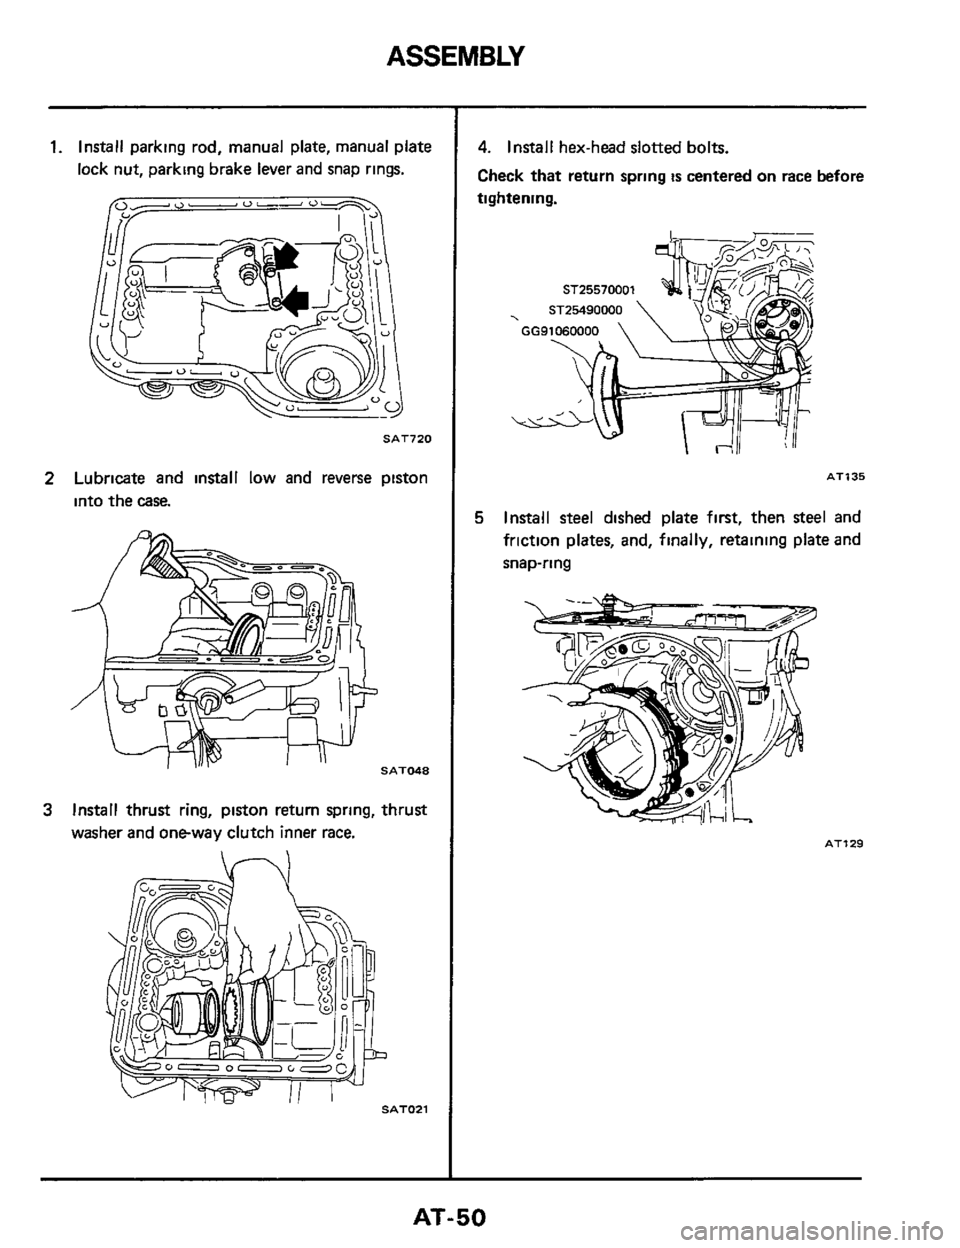 NISSAN 300ZX 1984 Z31 Automatic Transmission Service Manual ASSEMBLY 
1. Install parking  rod, manual  plate, manual  plate 
lock  nut, parking brake  lever and snap rings. 
Ob/-- 0 - 0- 7 
SAT720 
2 Lubricate  and install  low  and reverse  piston 
into the c